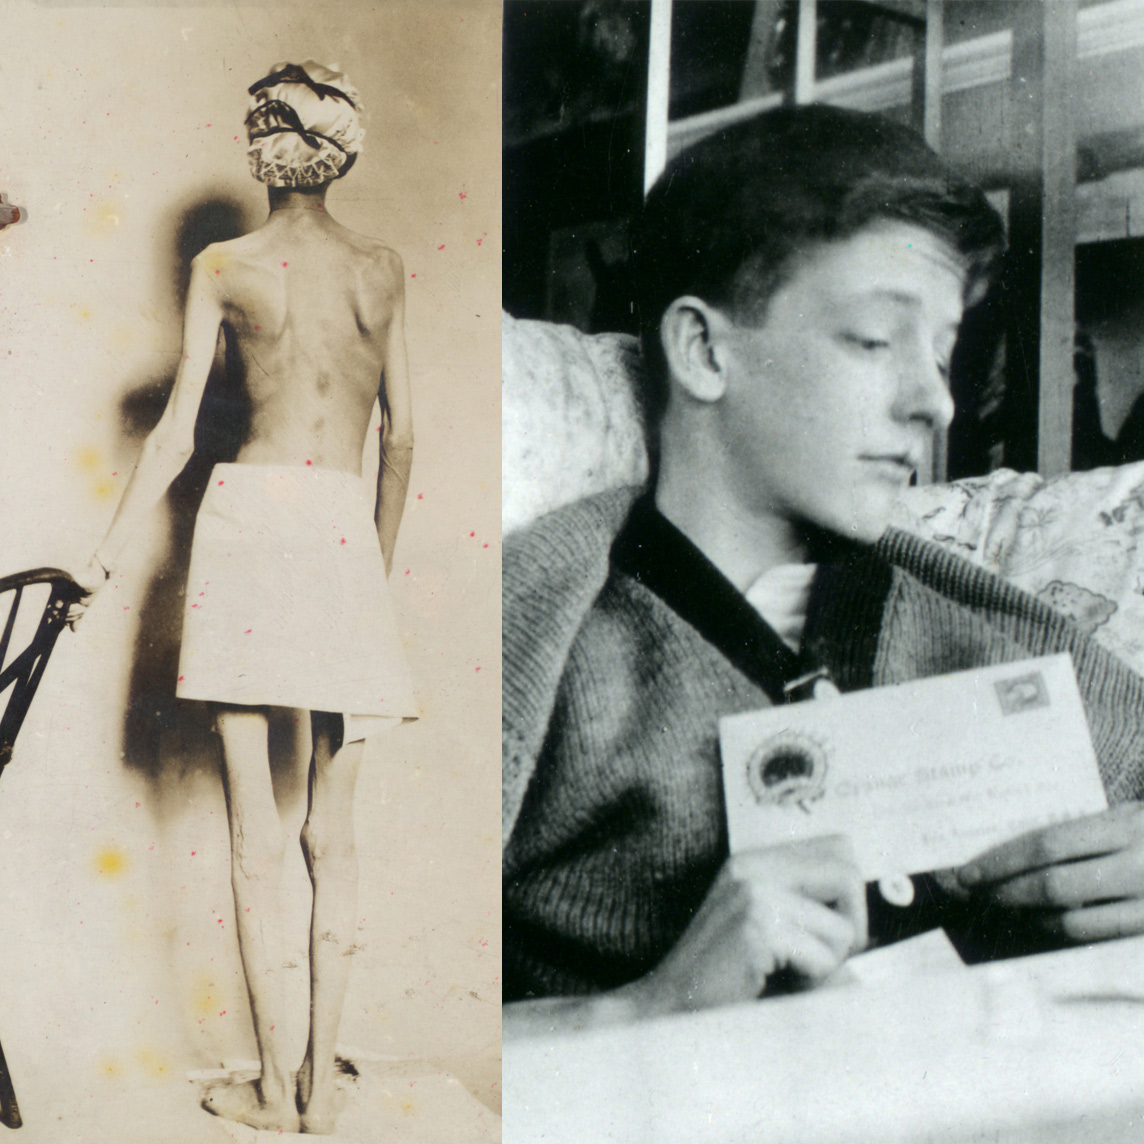 Left: Mrs. Doyle, a diabetic patient, photograph shows back view. Right: Jim Havens sitting up in bed holding a letter.